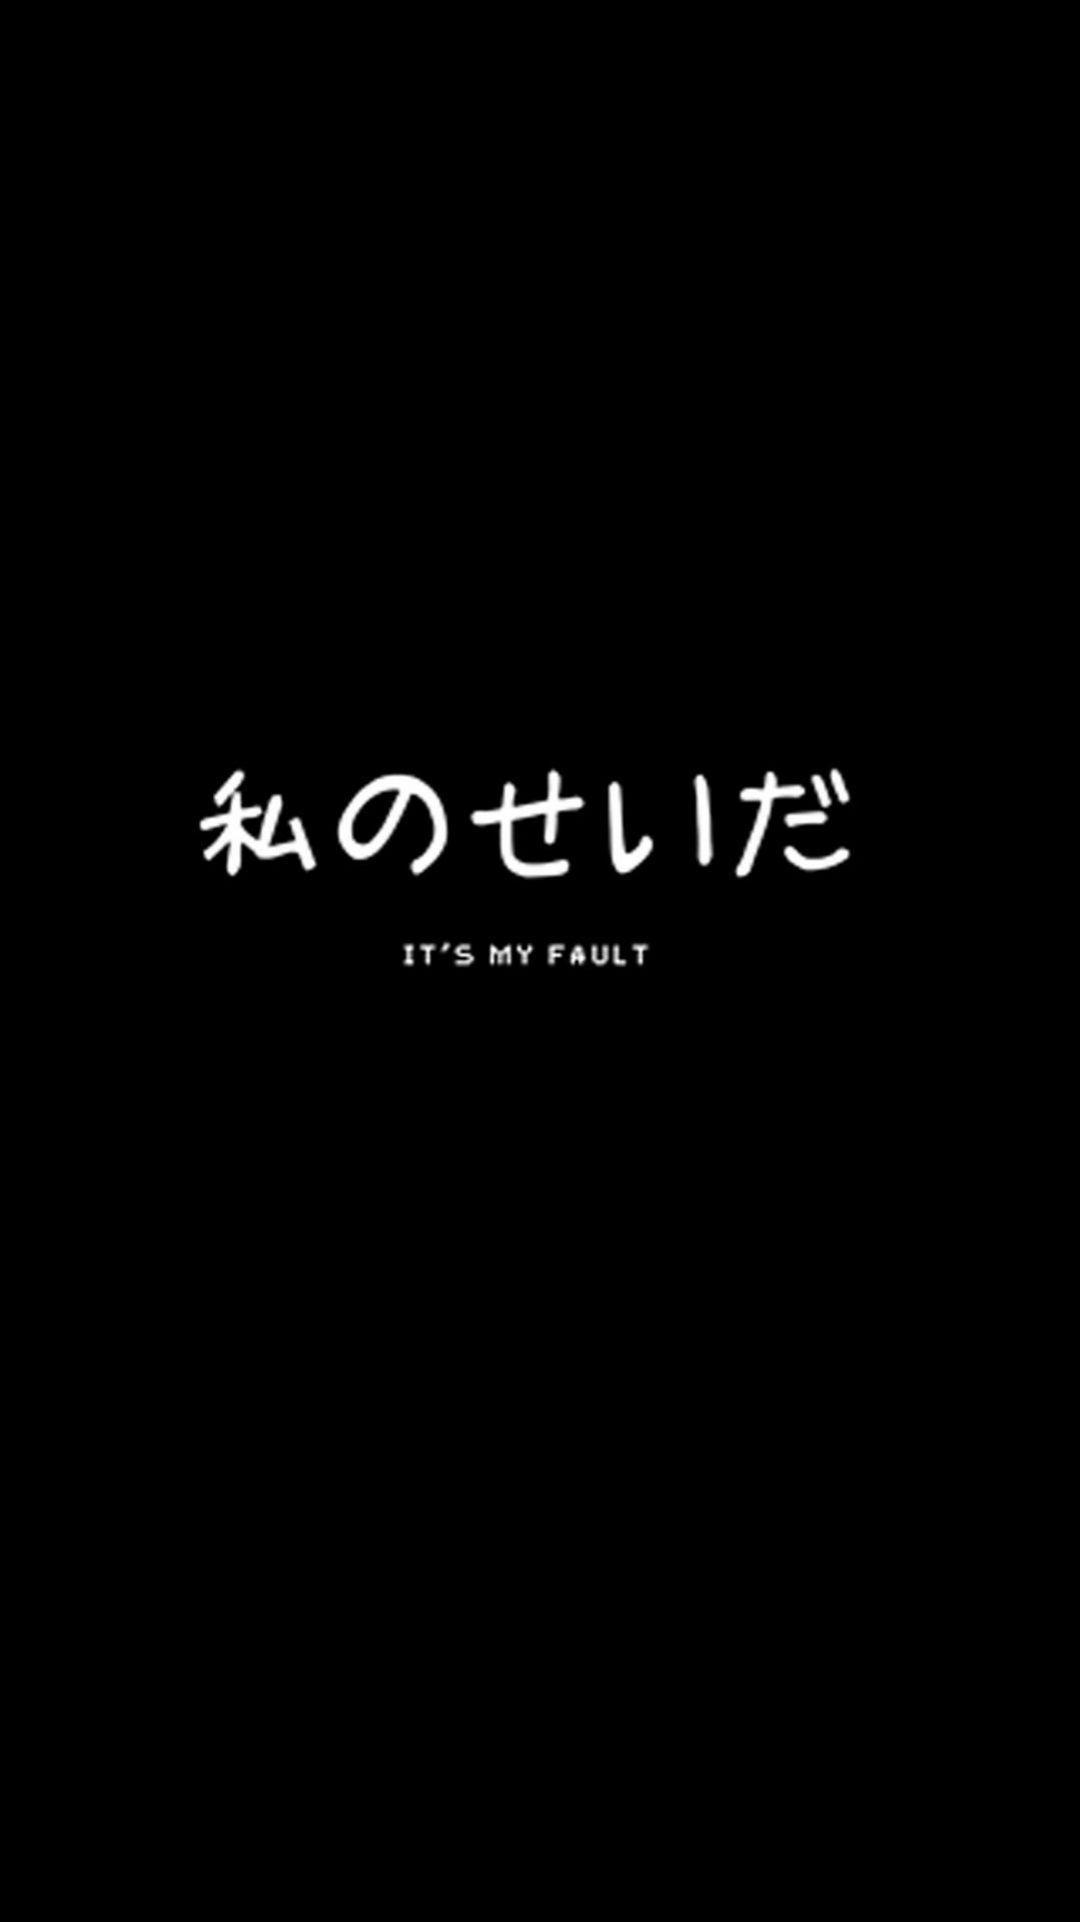 Japanese Aesthetic Quotes, iPhone, Desktop HD